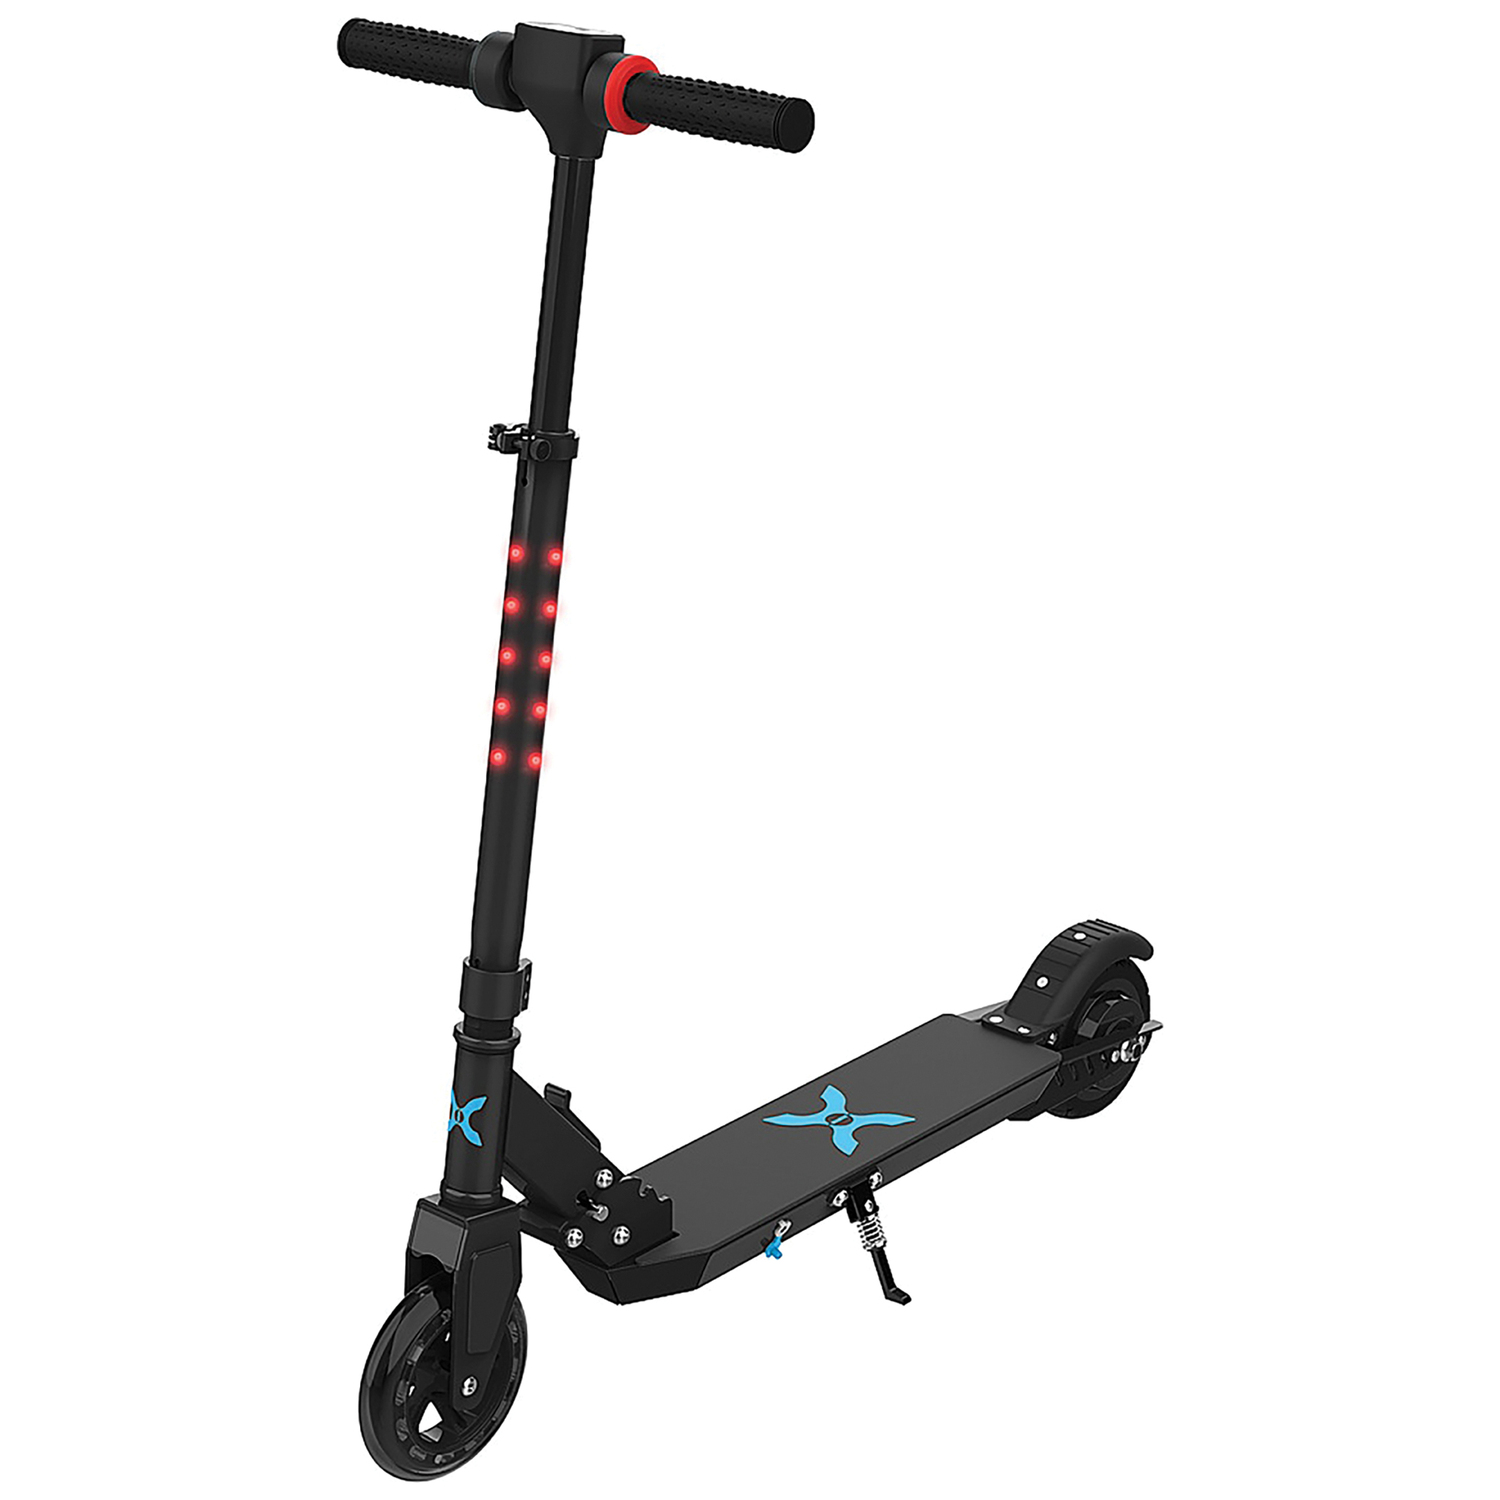 Hover-1 Refurbished Flare Electric Folding SCOOTER Powered Ride-on Toy with Lights (Black)